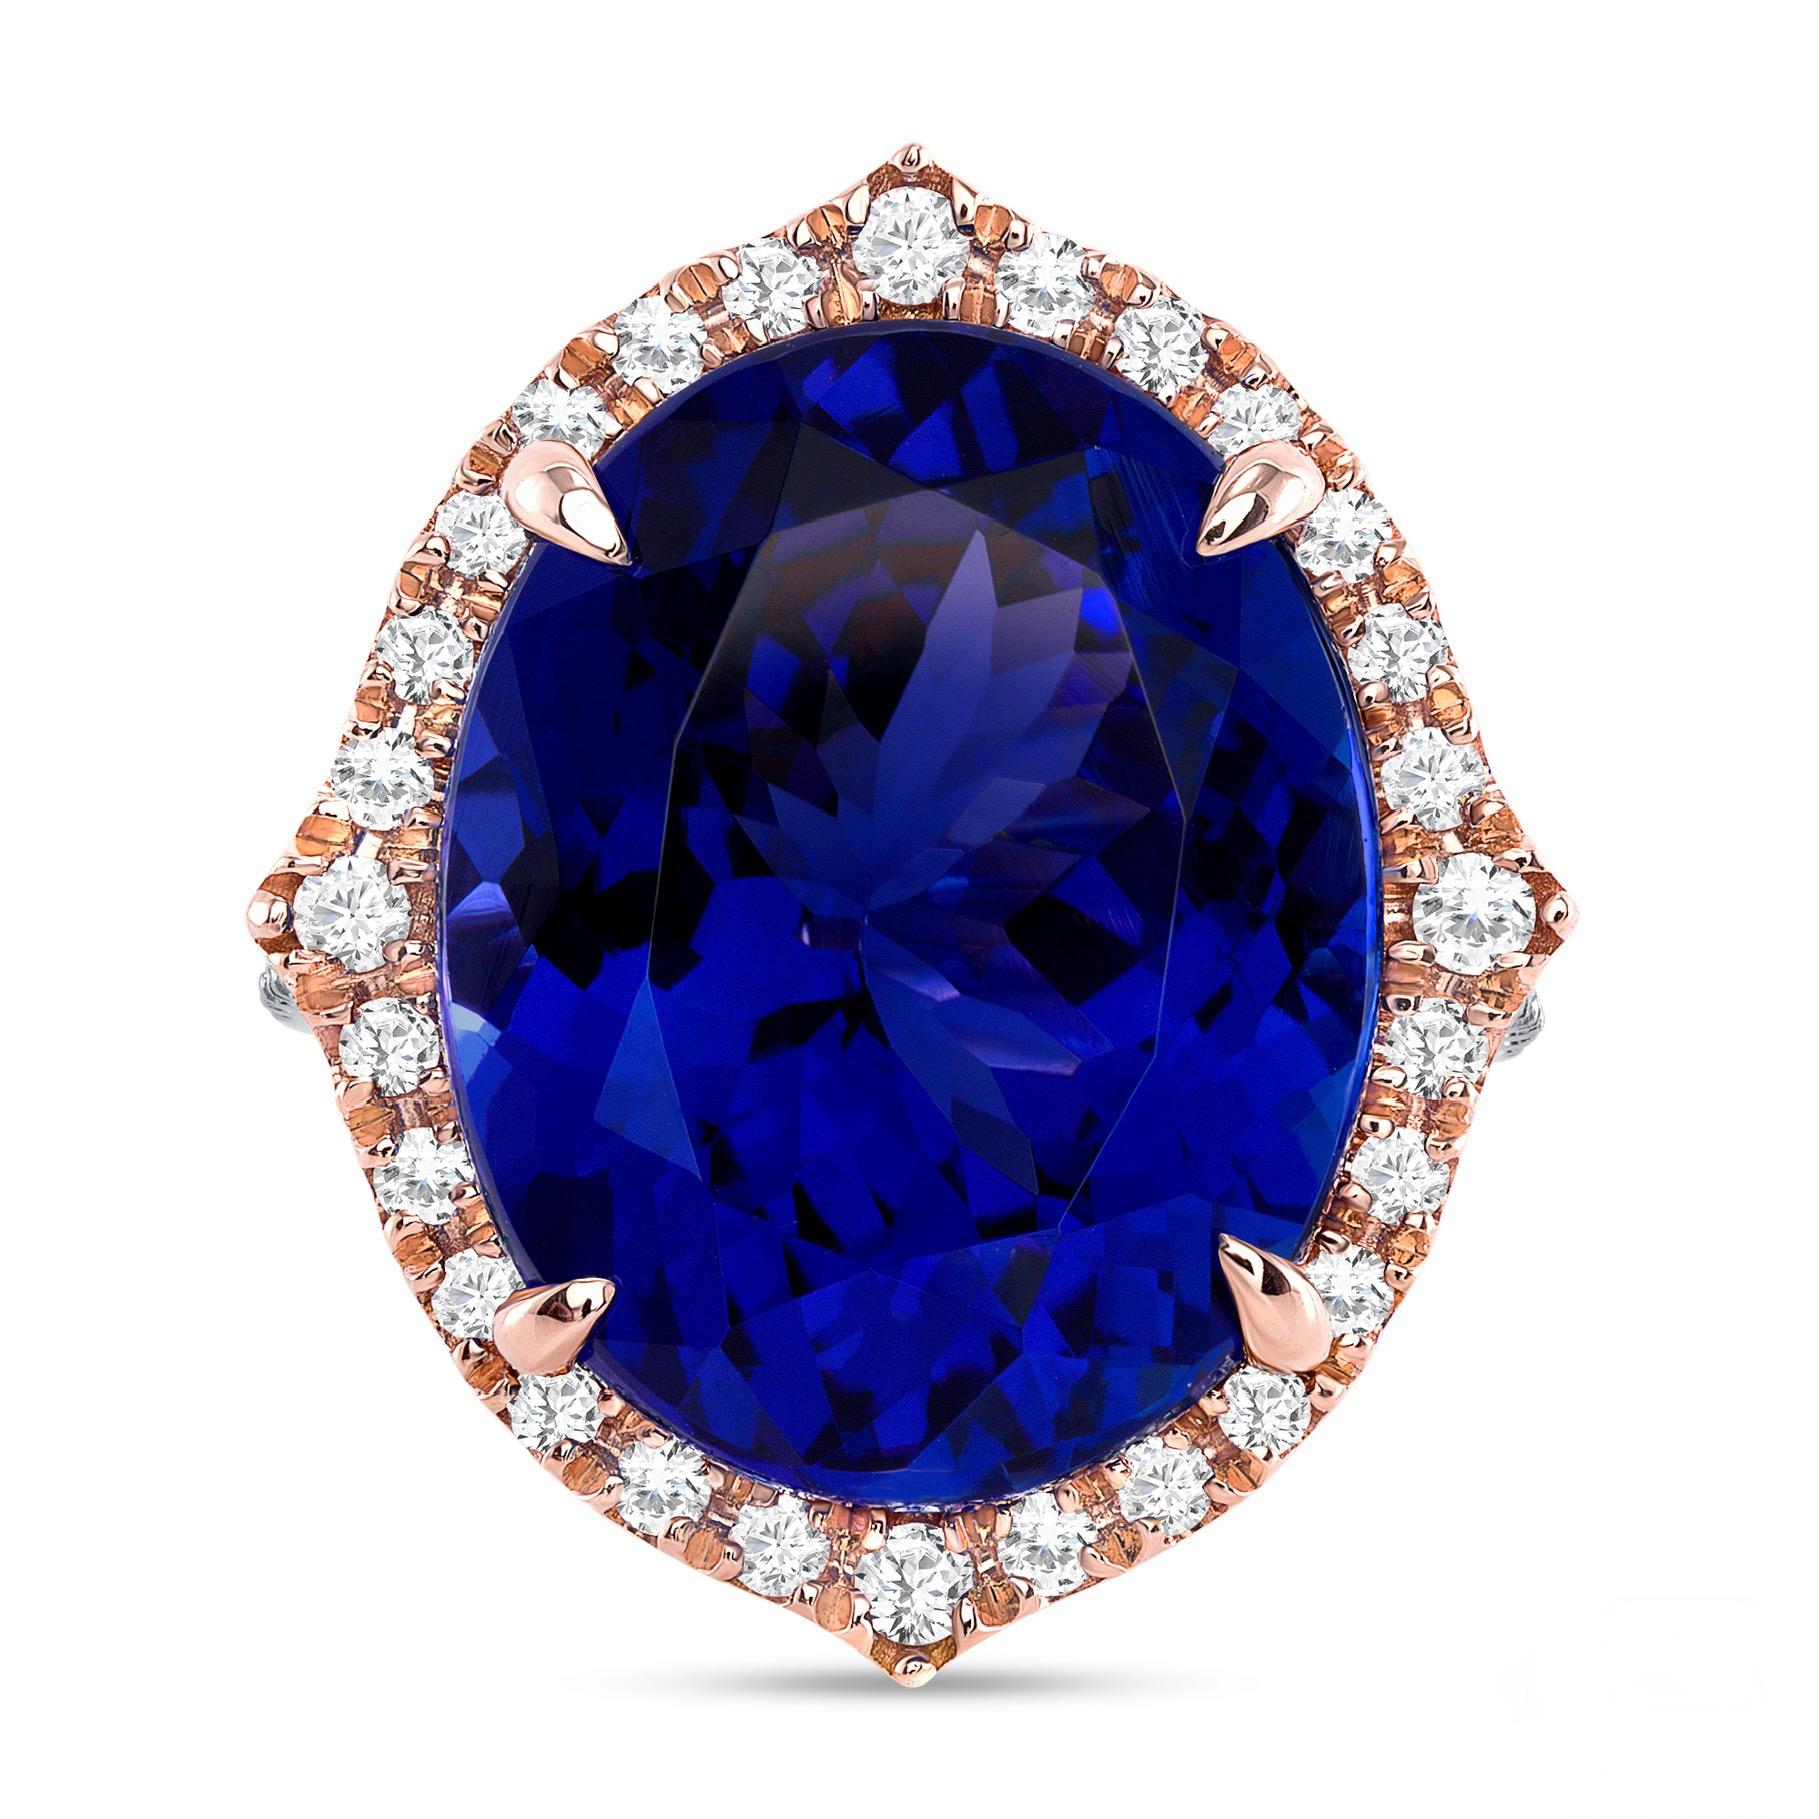 Oval Cut 18.13ct GIA certified, oval Tanzanite ring in 18K rose gold. For Sale